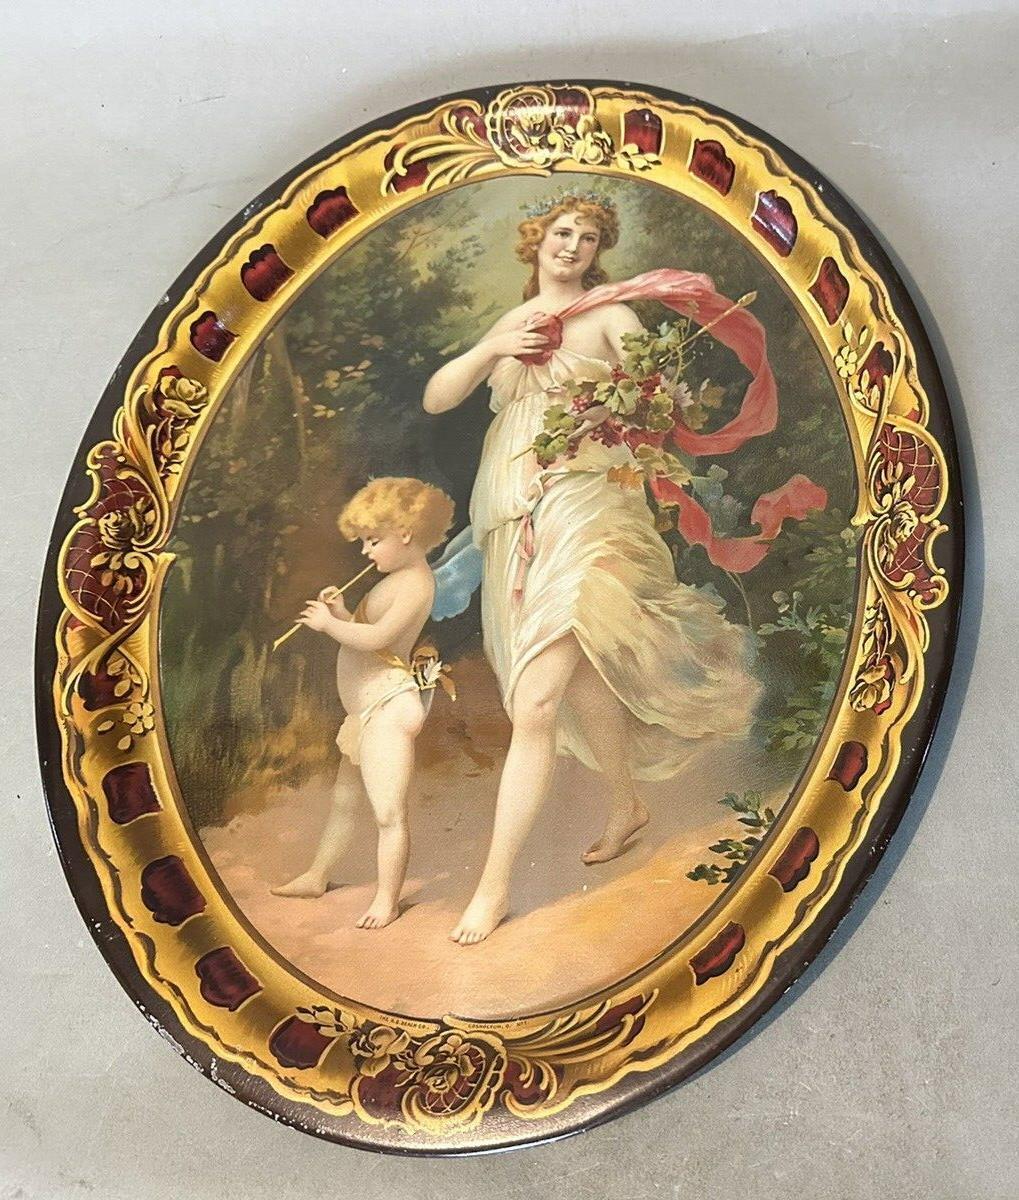 Vintage Antique Advertising Tray with Flute Playing Cherub & Maiden